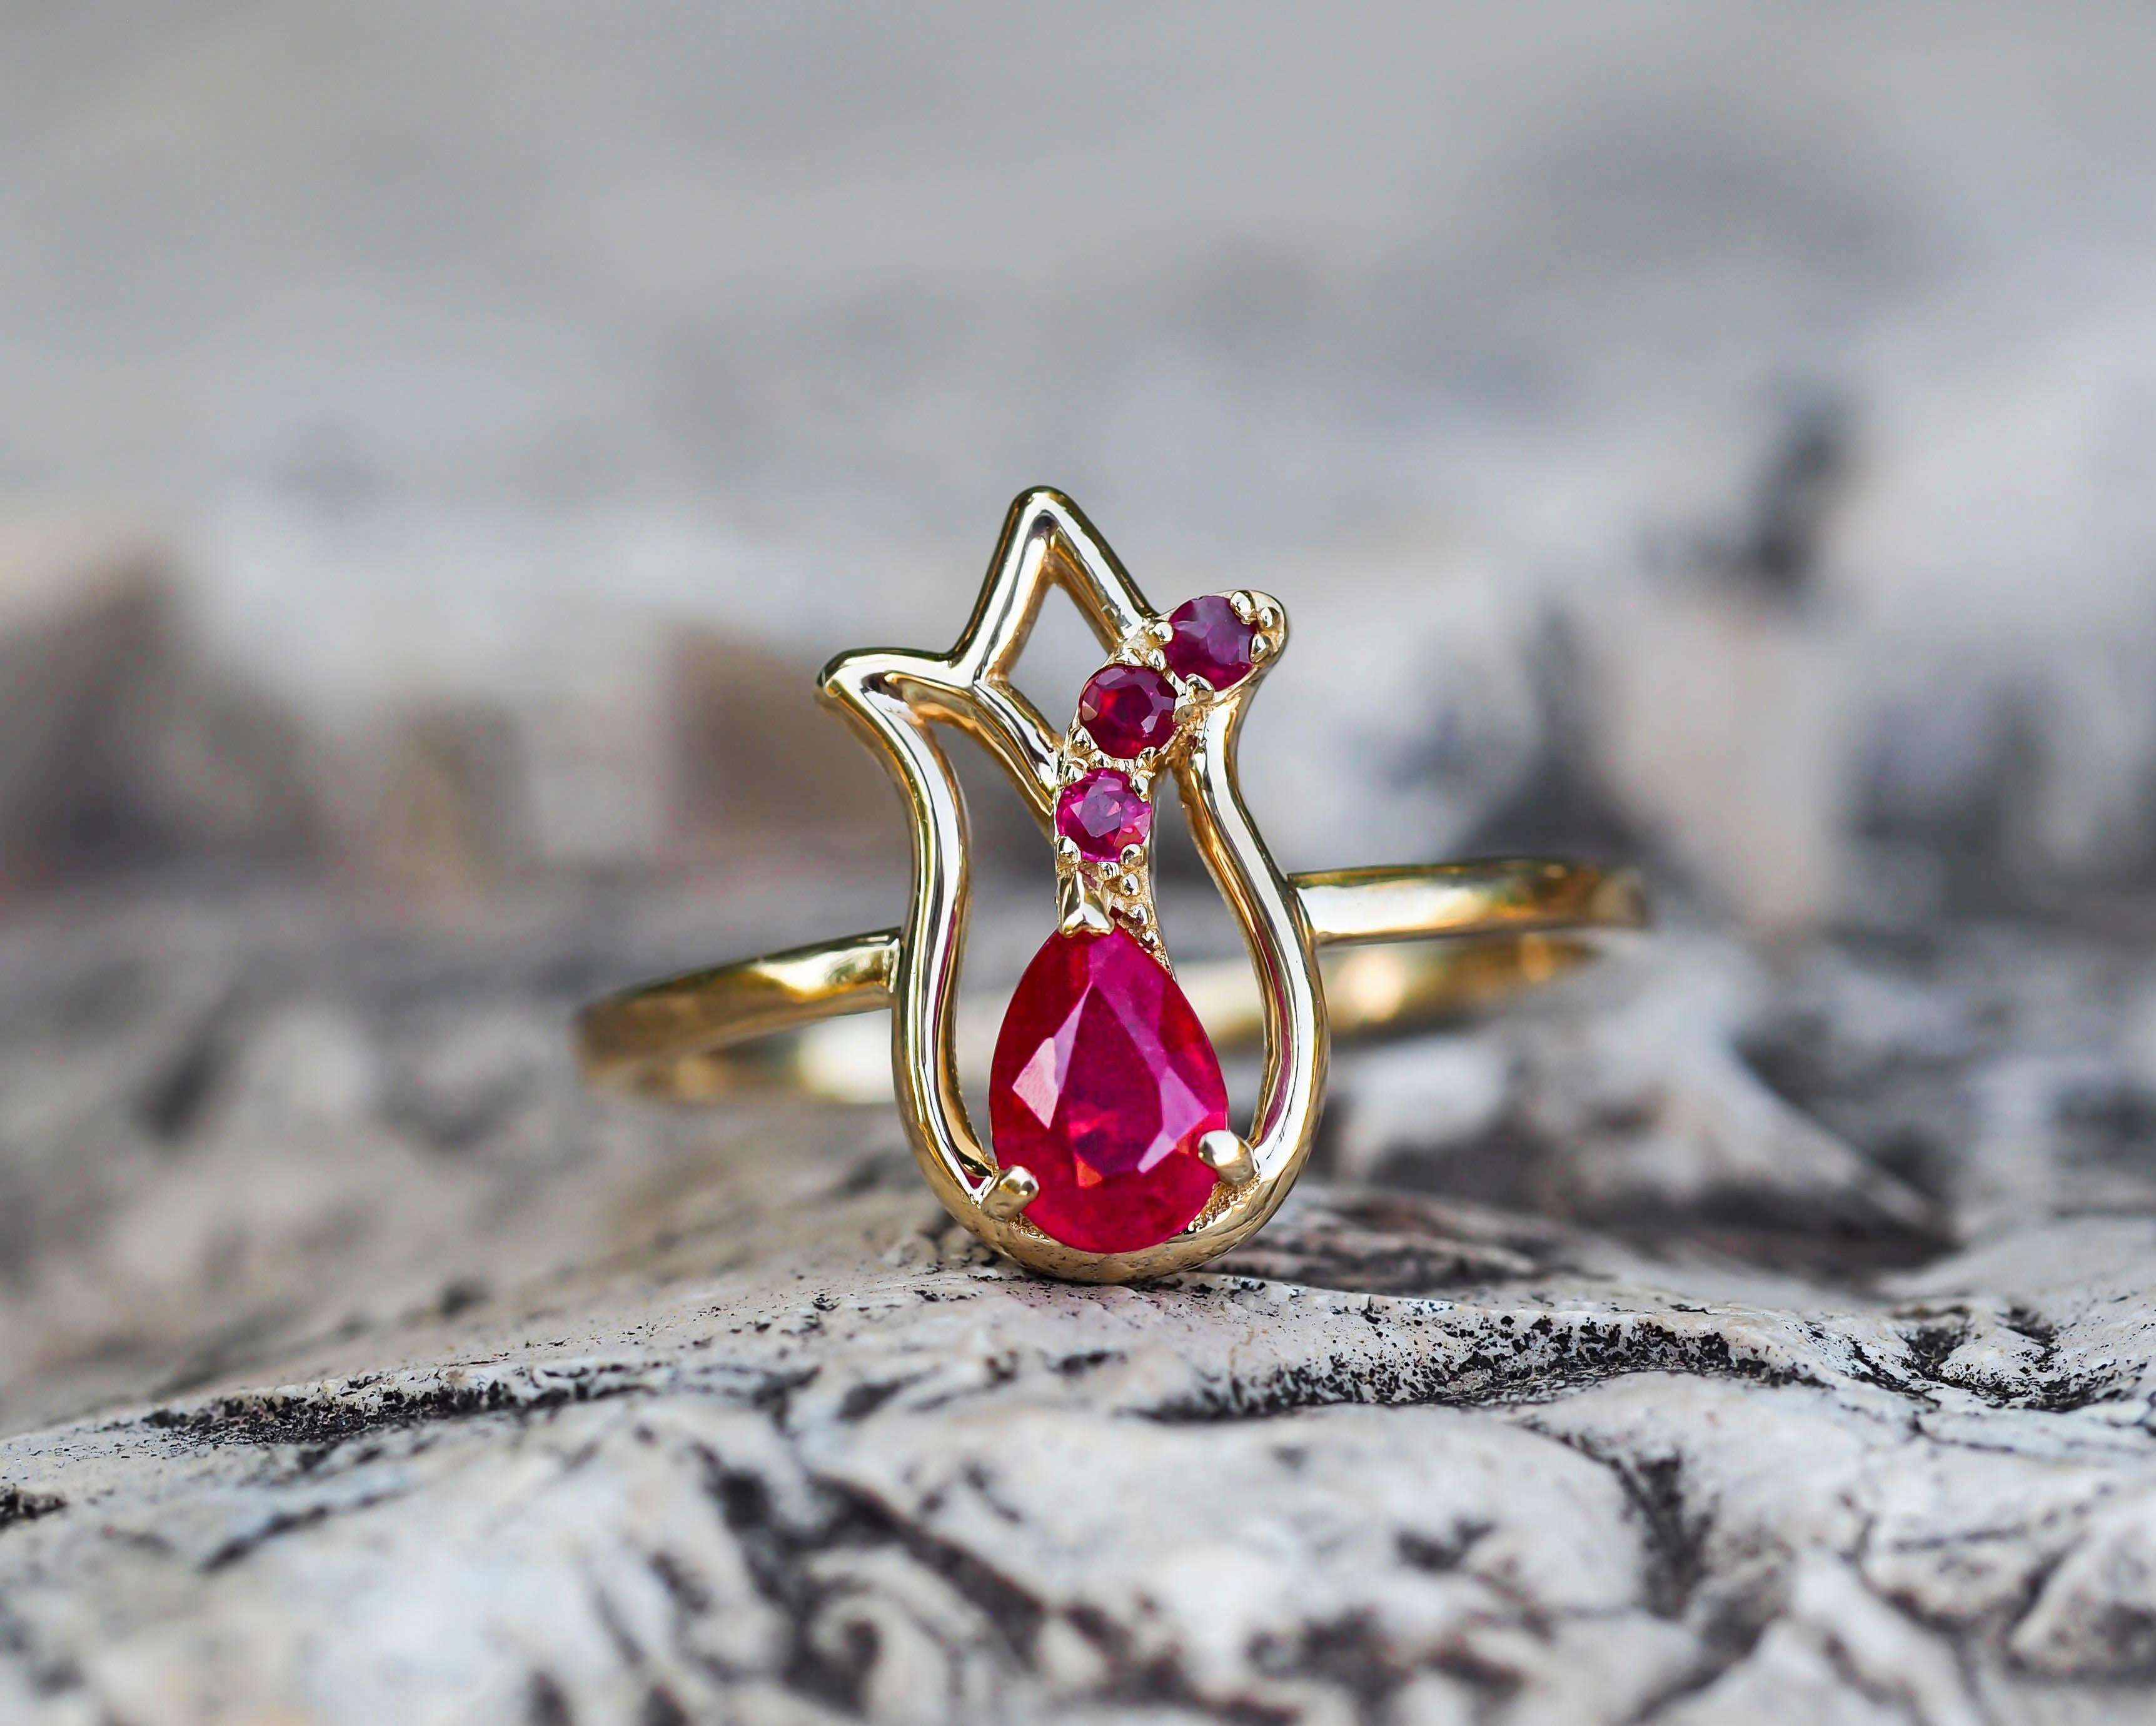 14 Karat Gold Ring with Ruby and Side Rubies, Gold Tulip Flower Ring 3